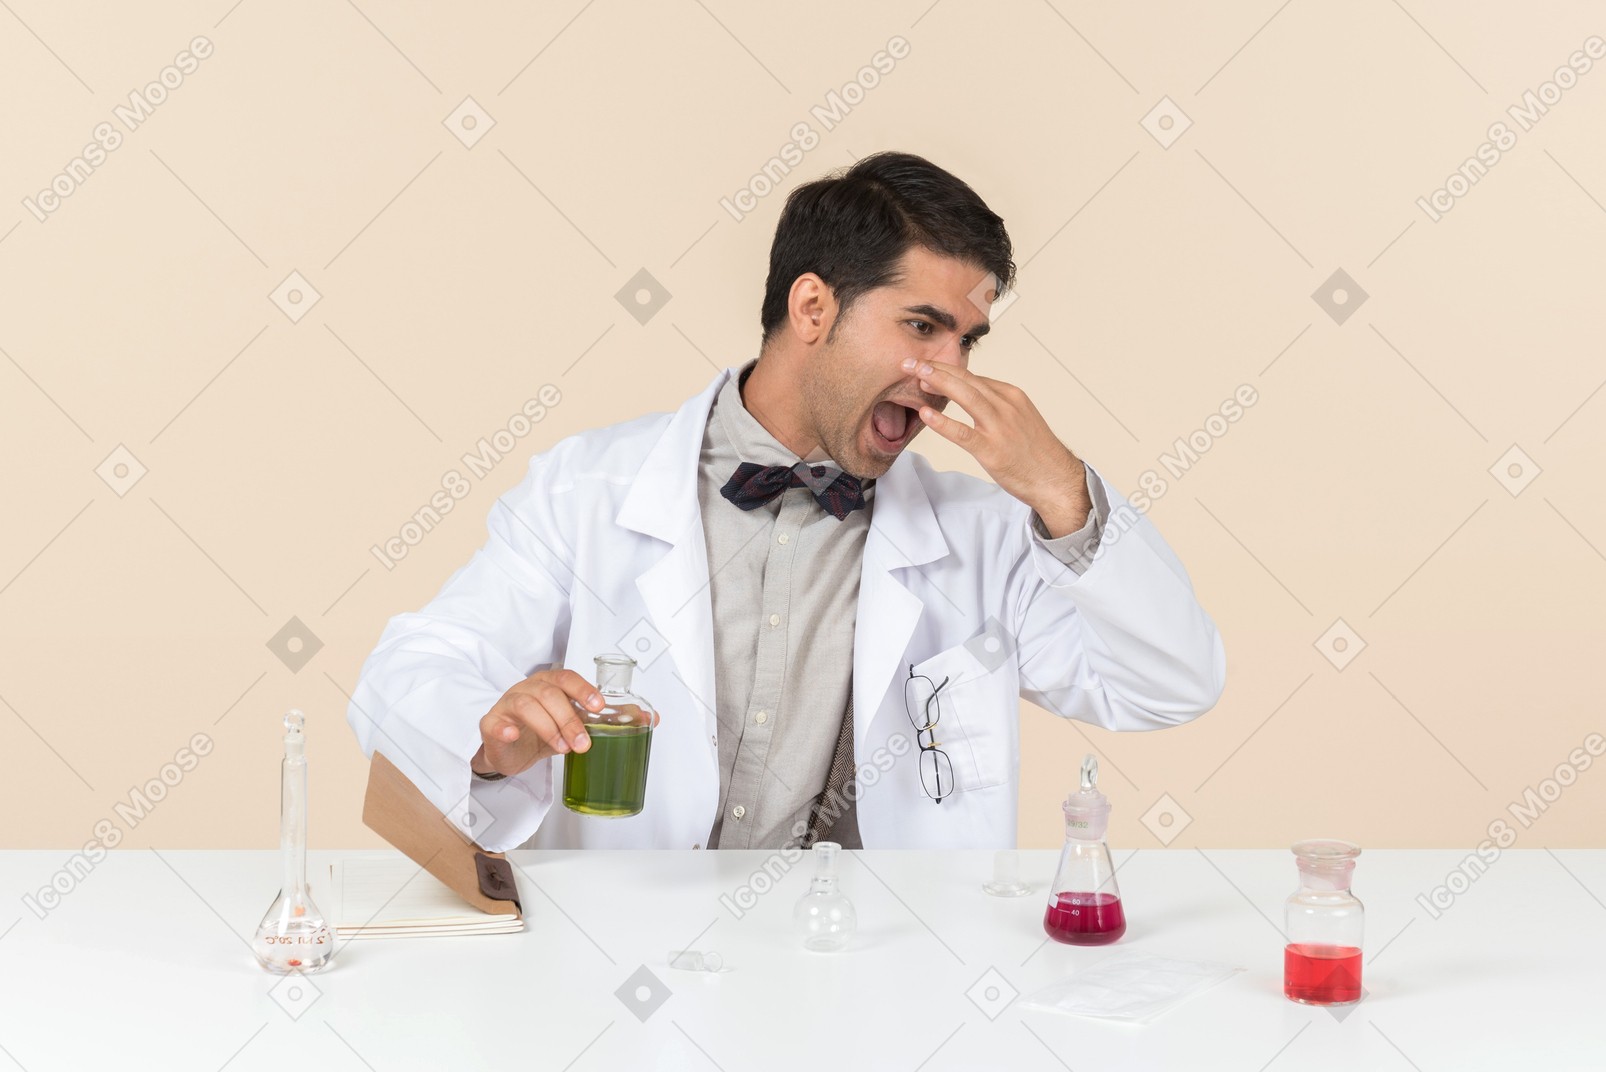 Young male scientist smelling something bad while working in a lab